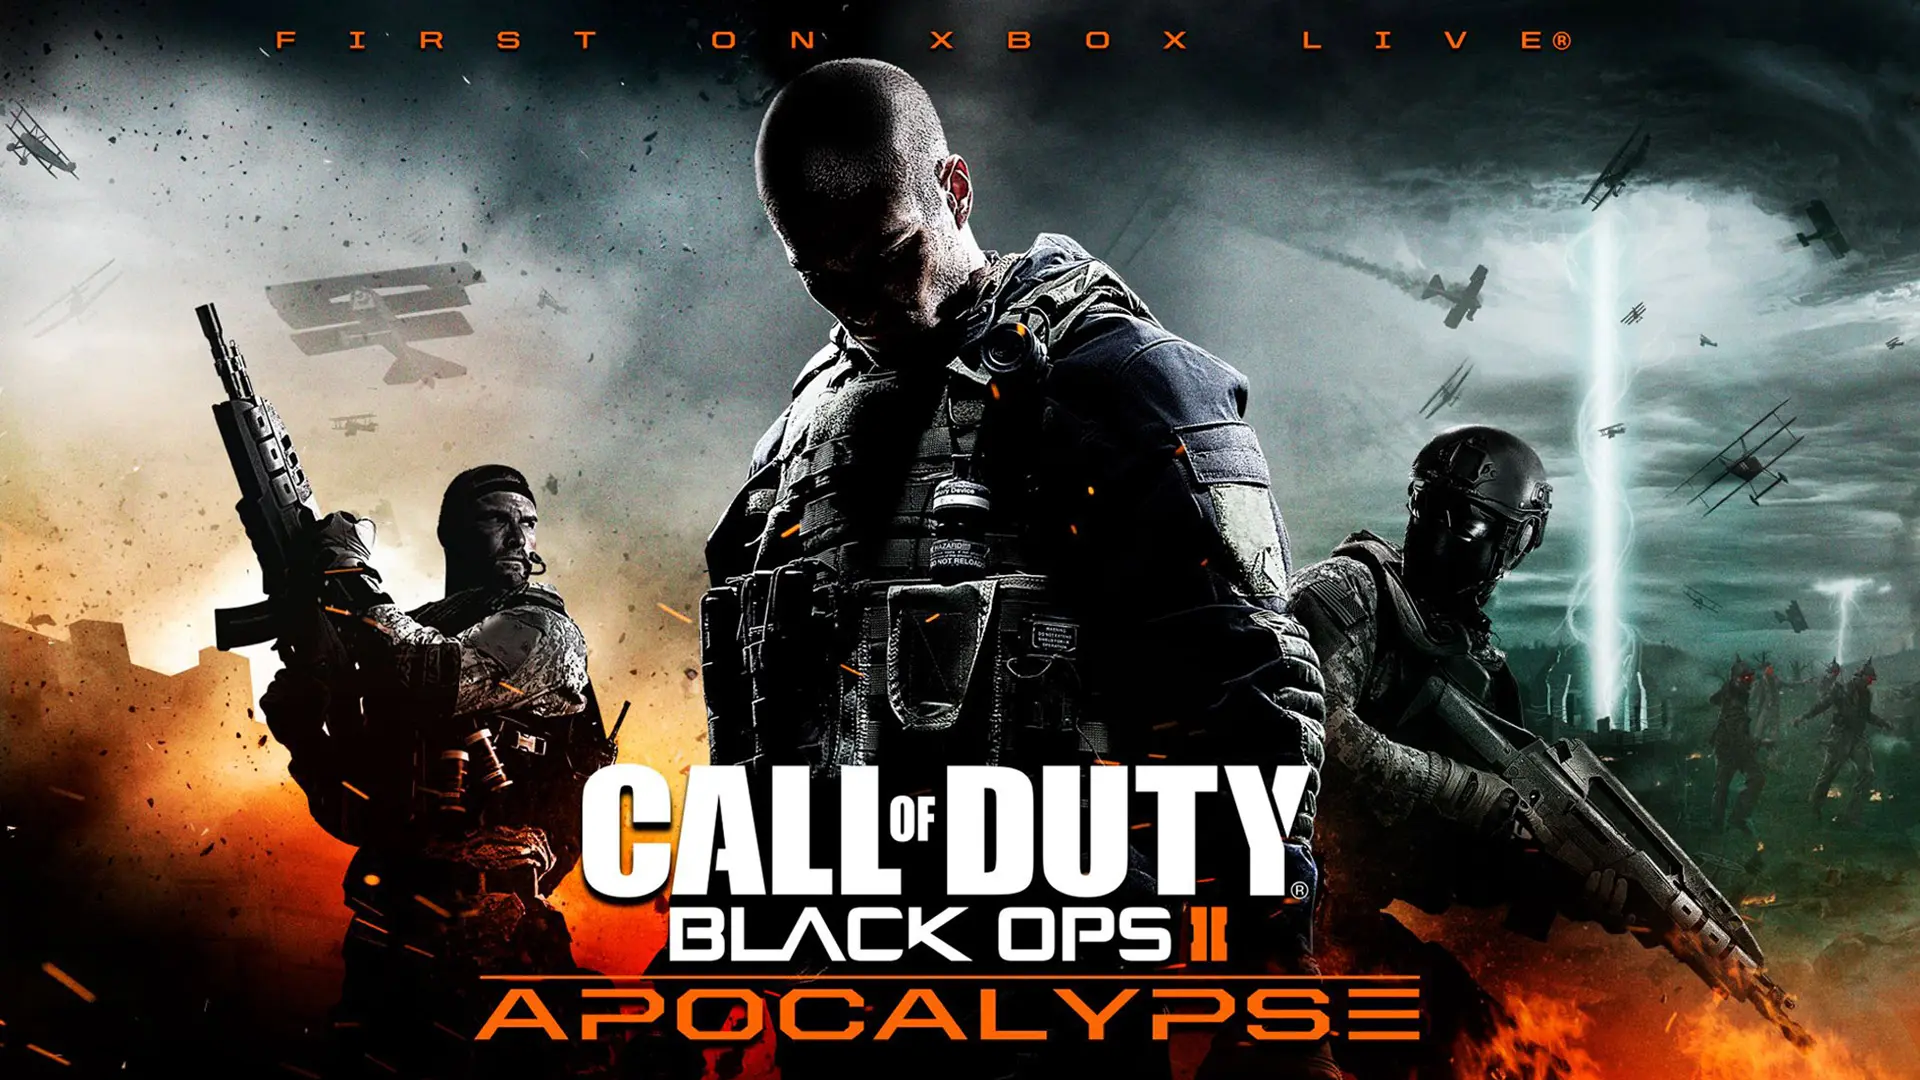 Call of Duty Black Ops 2 wallpaper 10